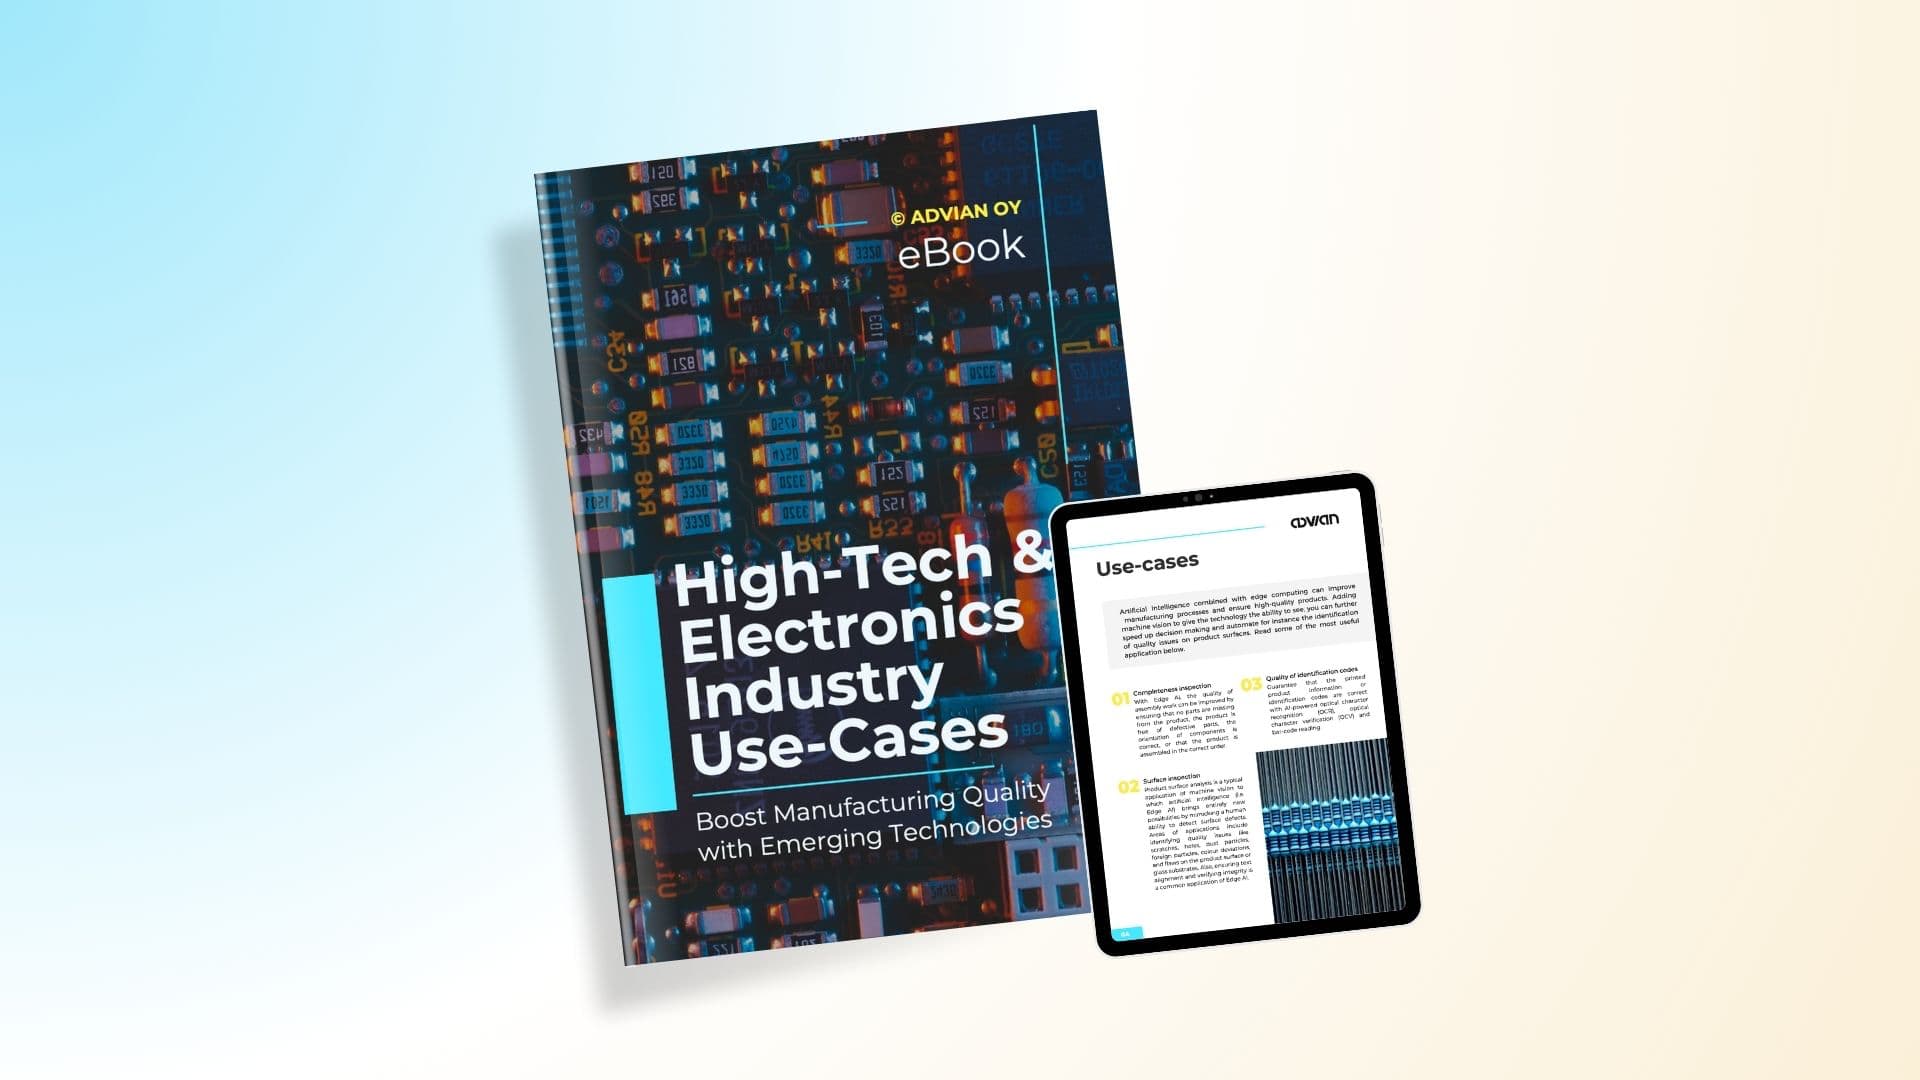 High-tech and electronics industry use-cases ebook mockup